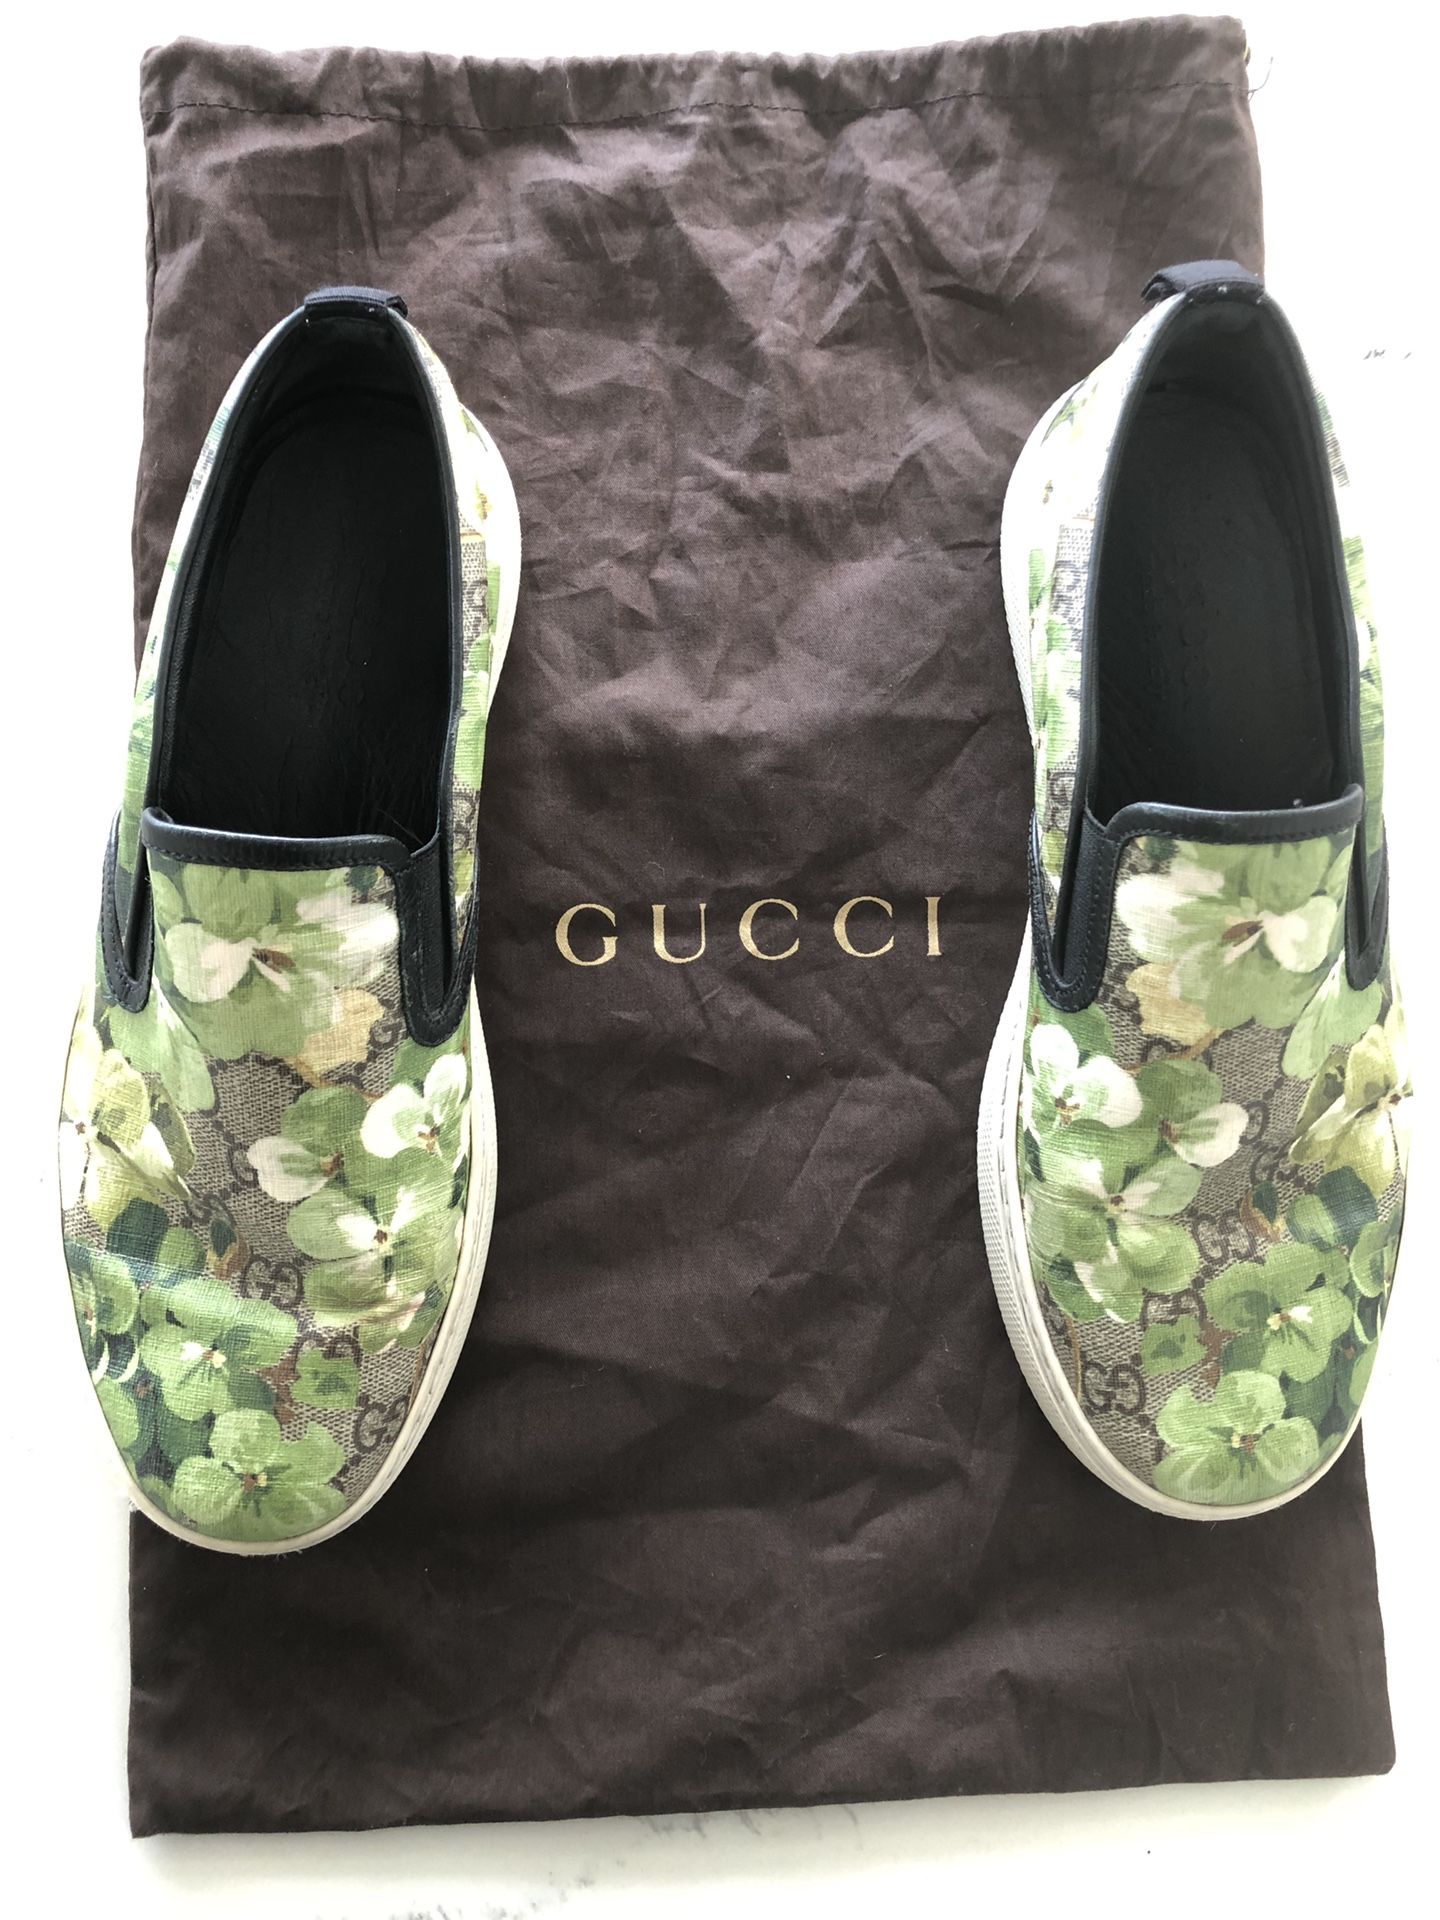 Gucci slip on shoes size 8.5, great condition